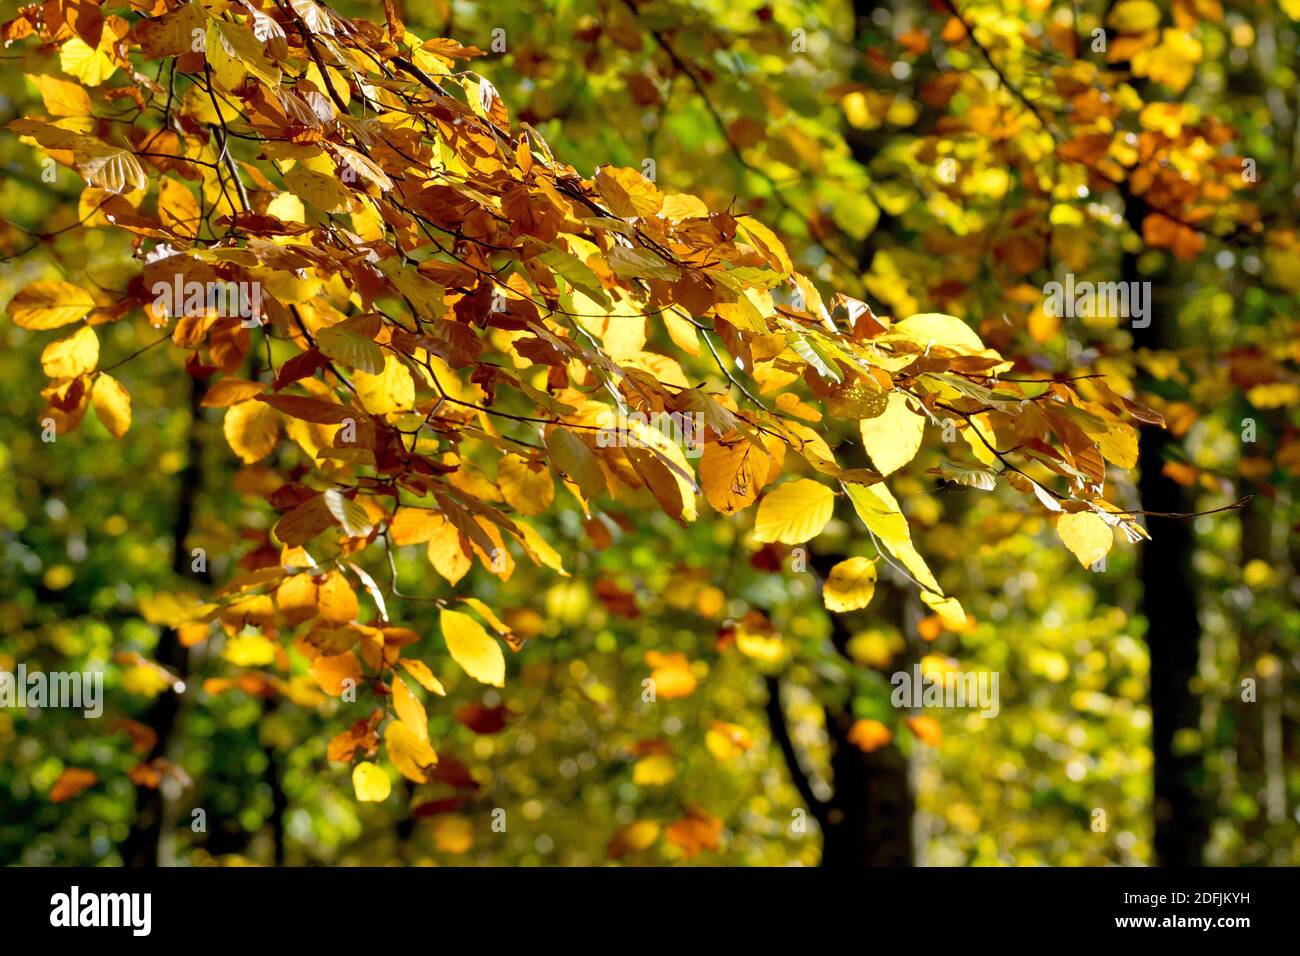 Beech (fagus sylvatica), showing a drooping branch of autumn leaves lit by low, warm sunlight. Stock Photo